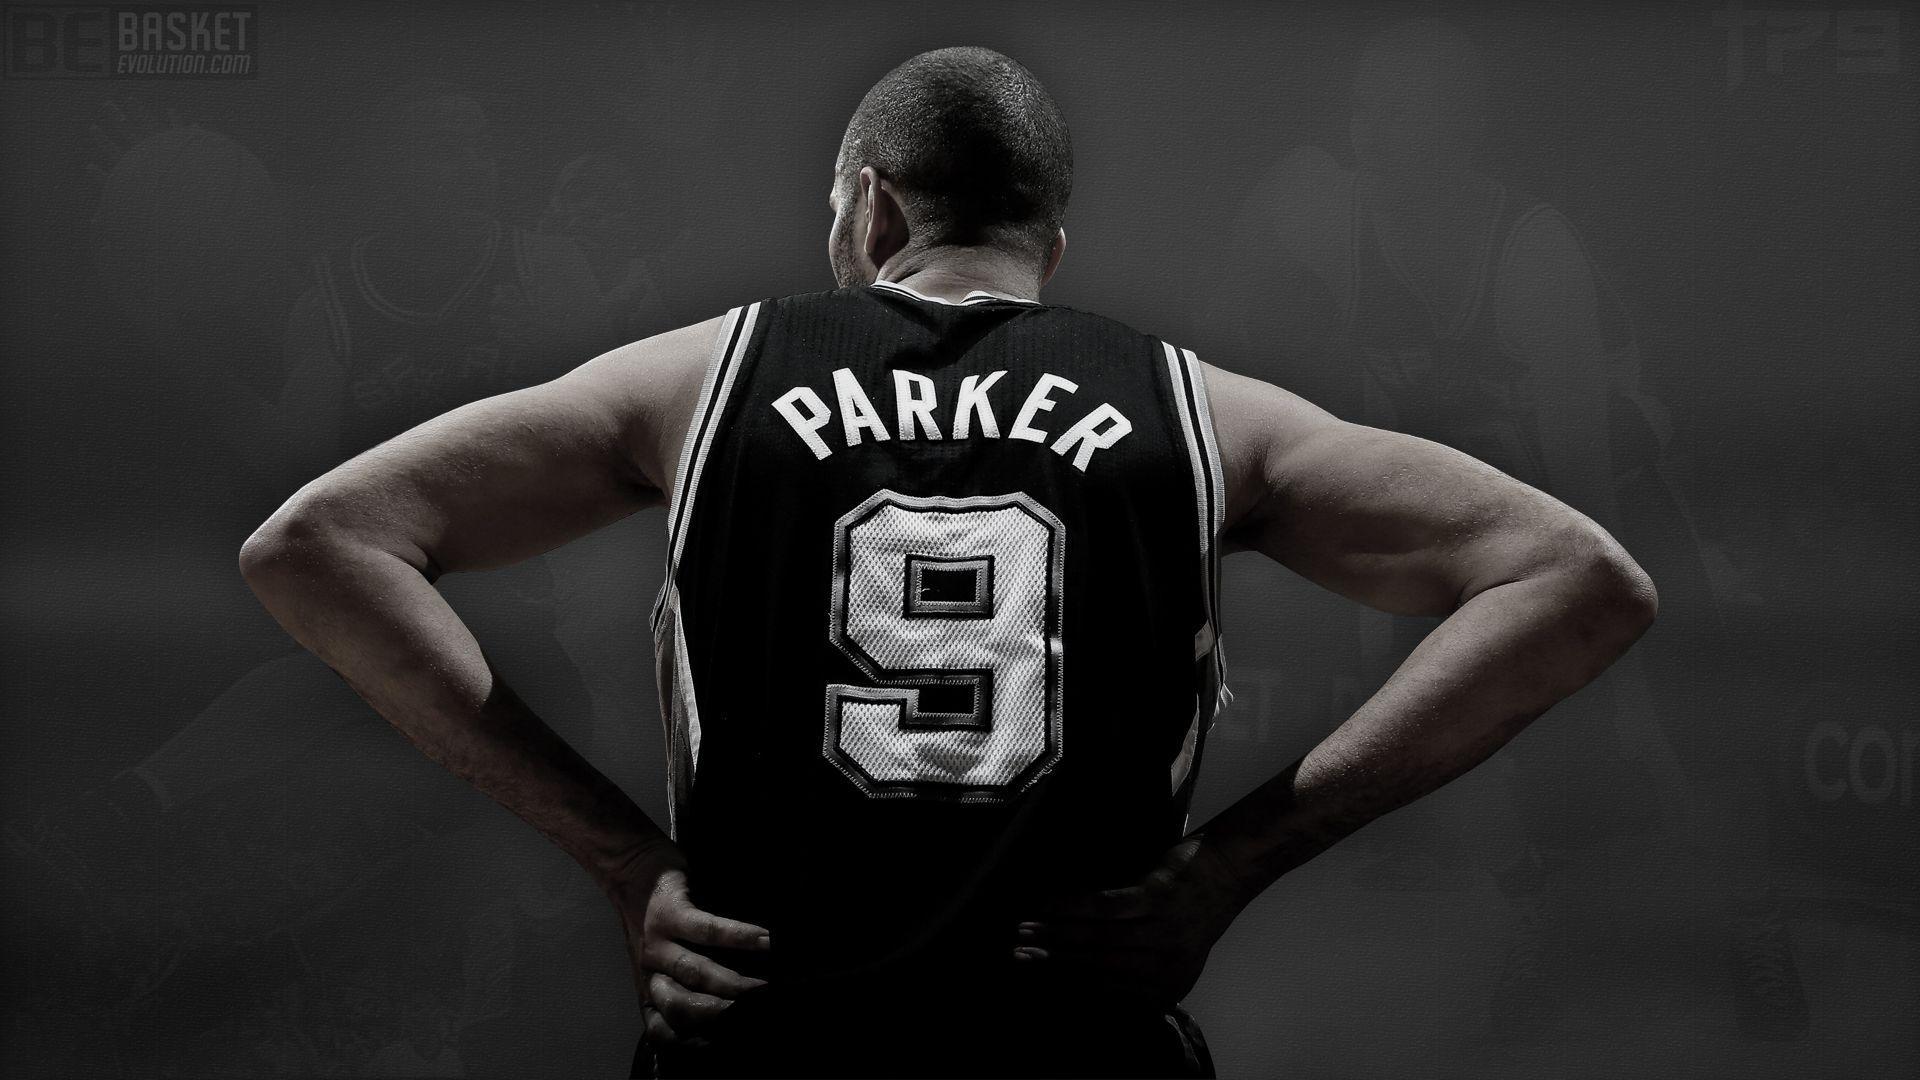 Basketball player Tony Parker wallpaper and image